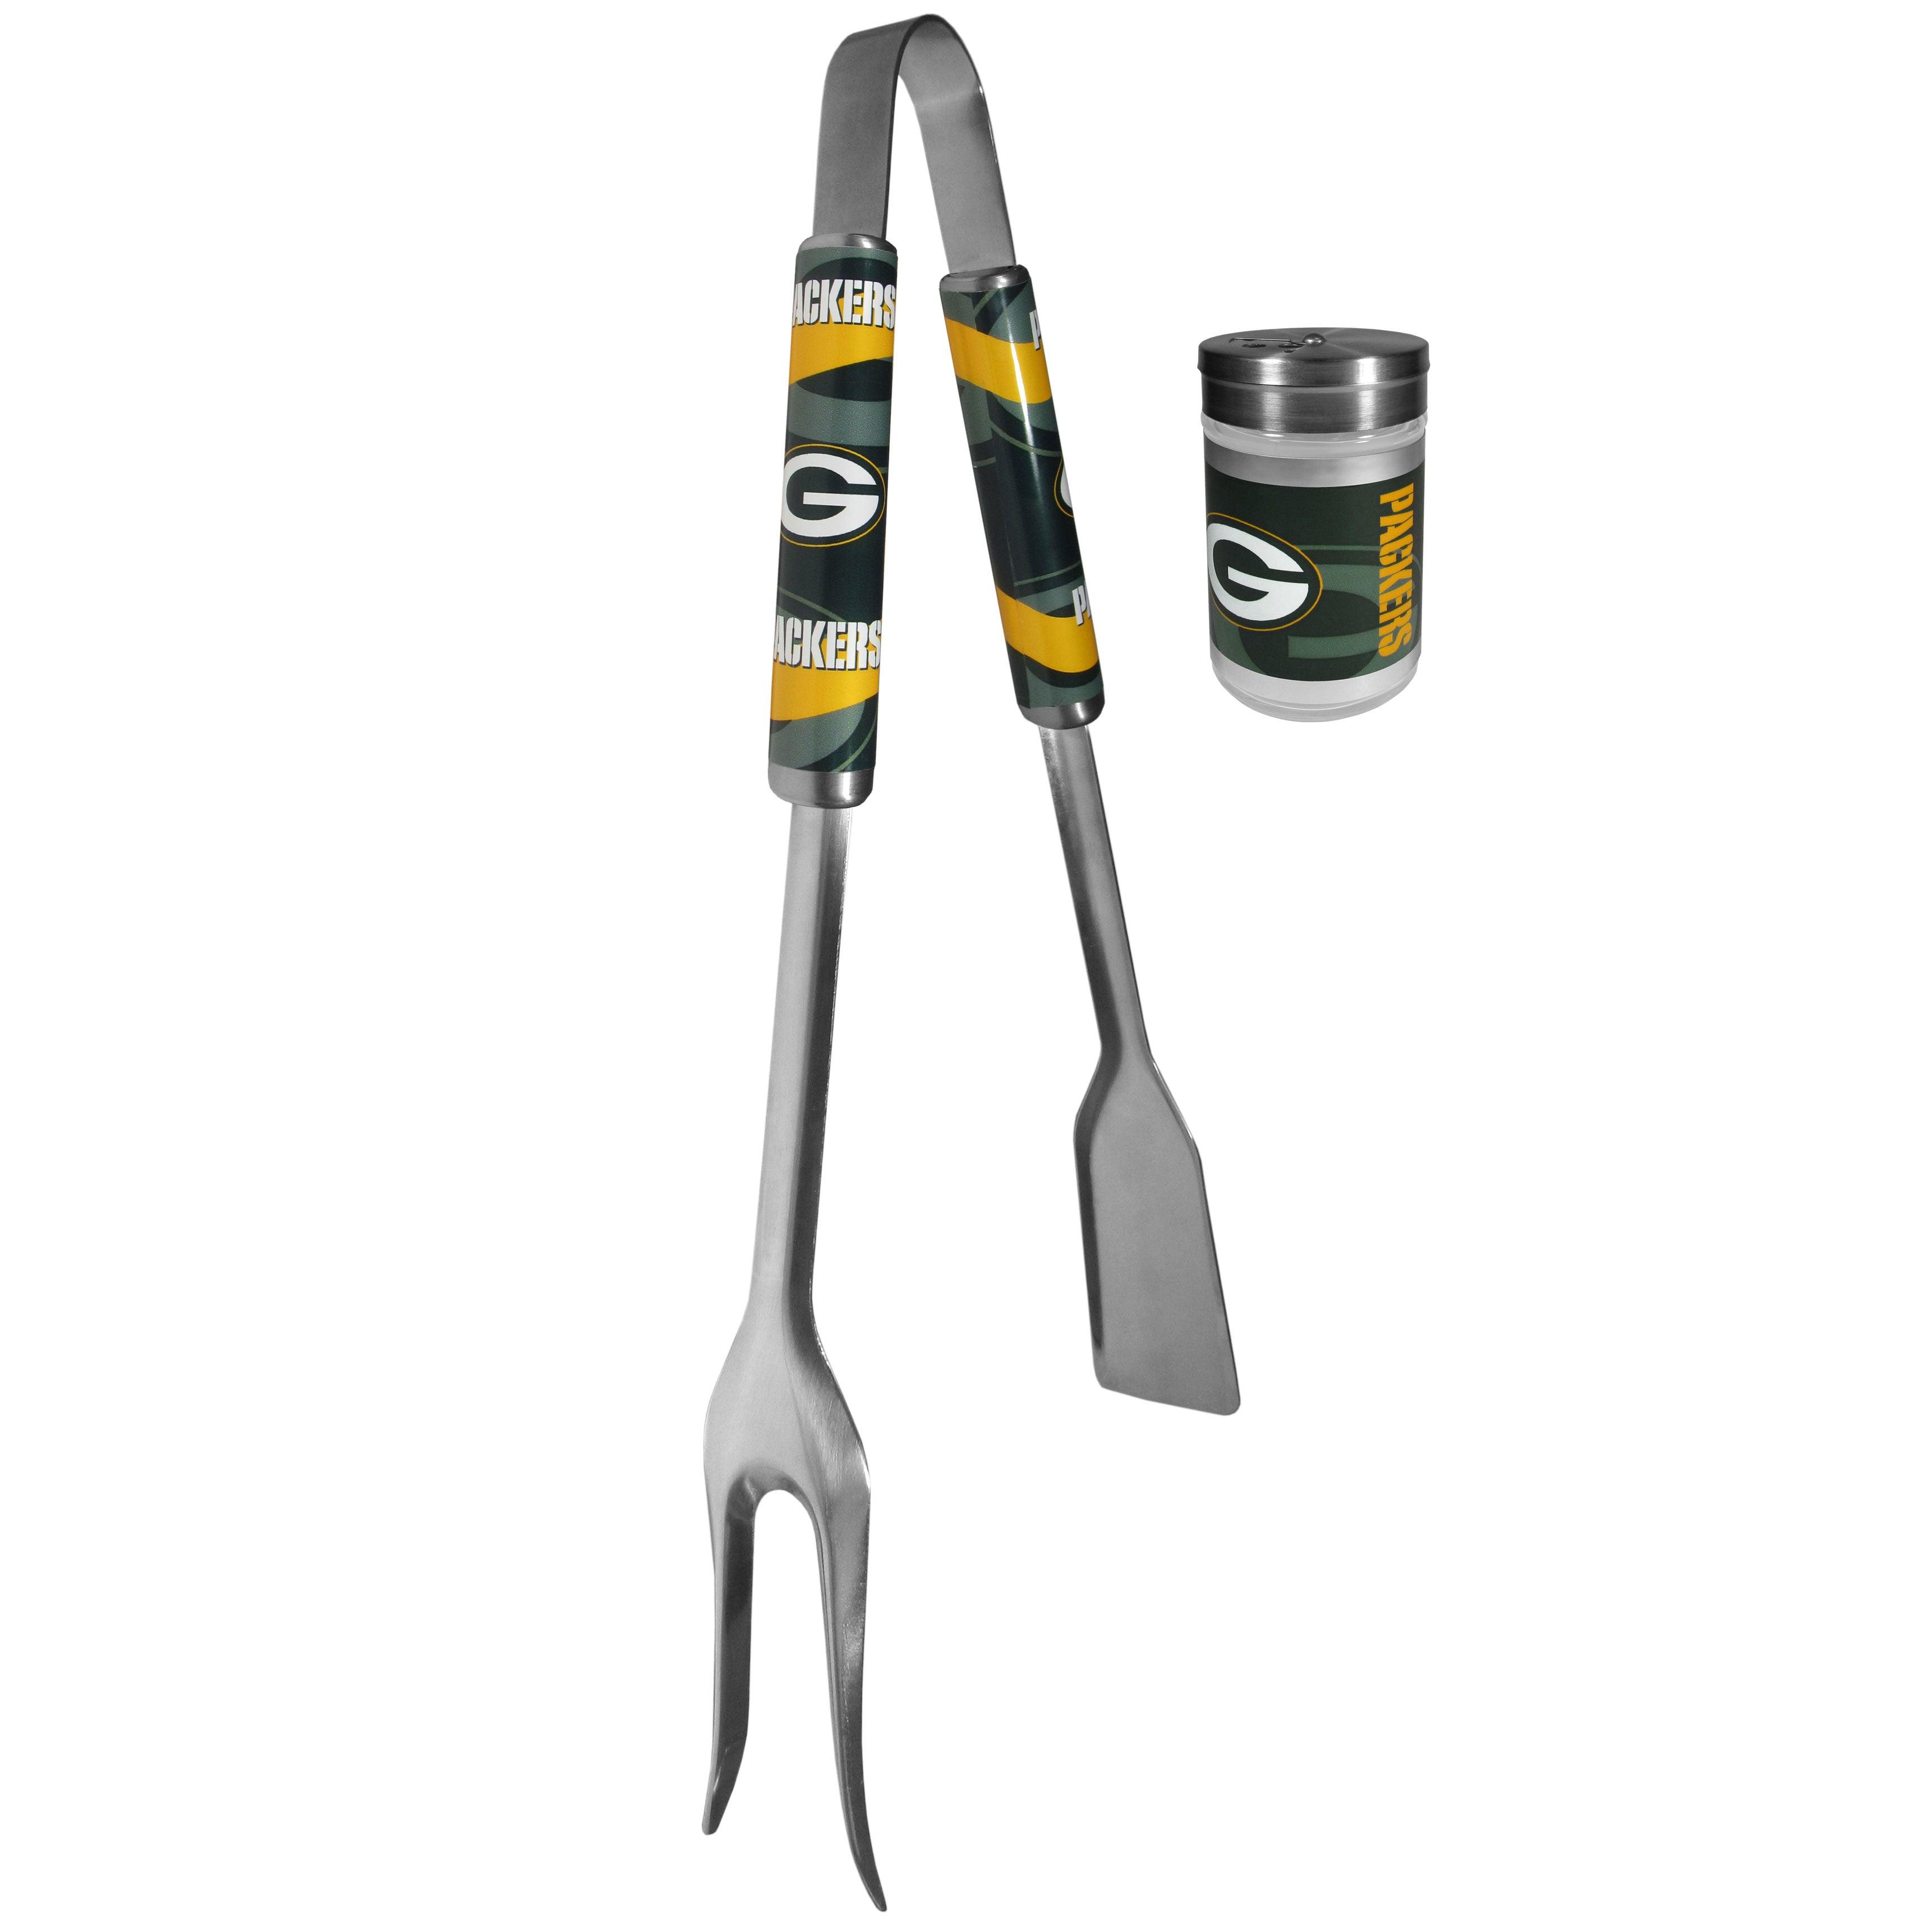 Green Bay Packers 3 in 1 BBQ Tool and Salt & Pepper Shaker - Flyclothing LLC